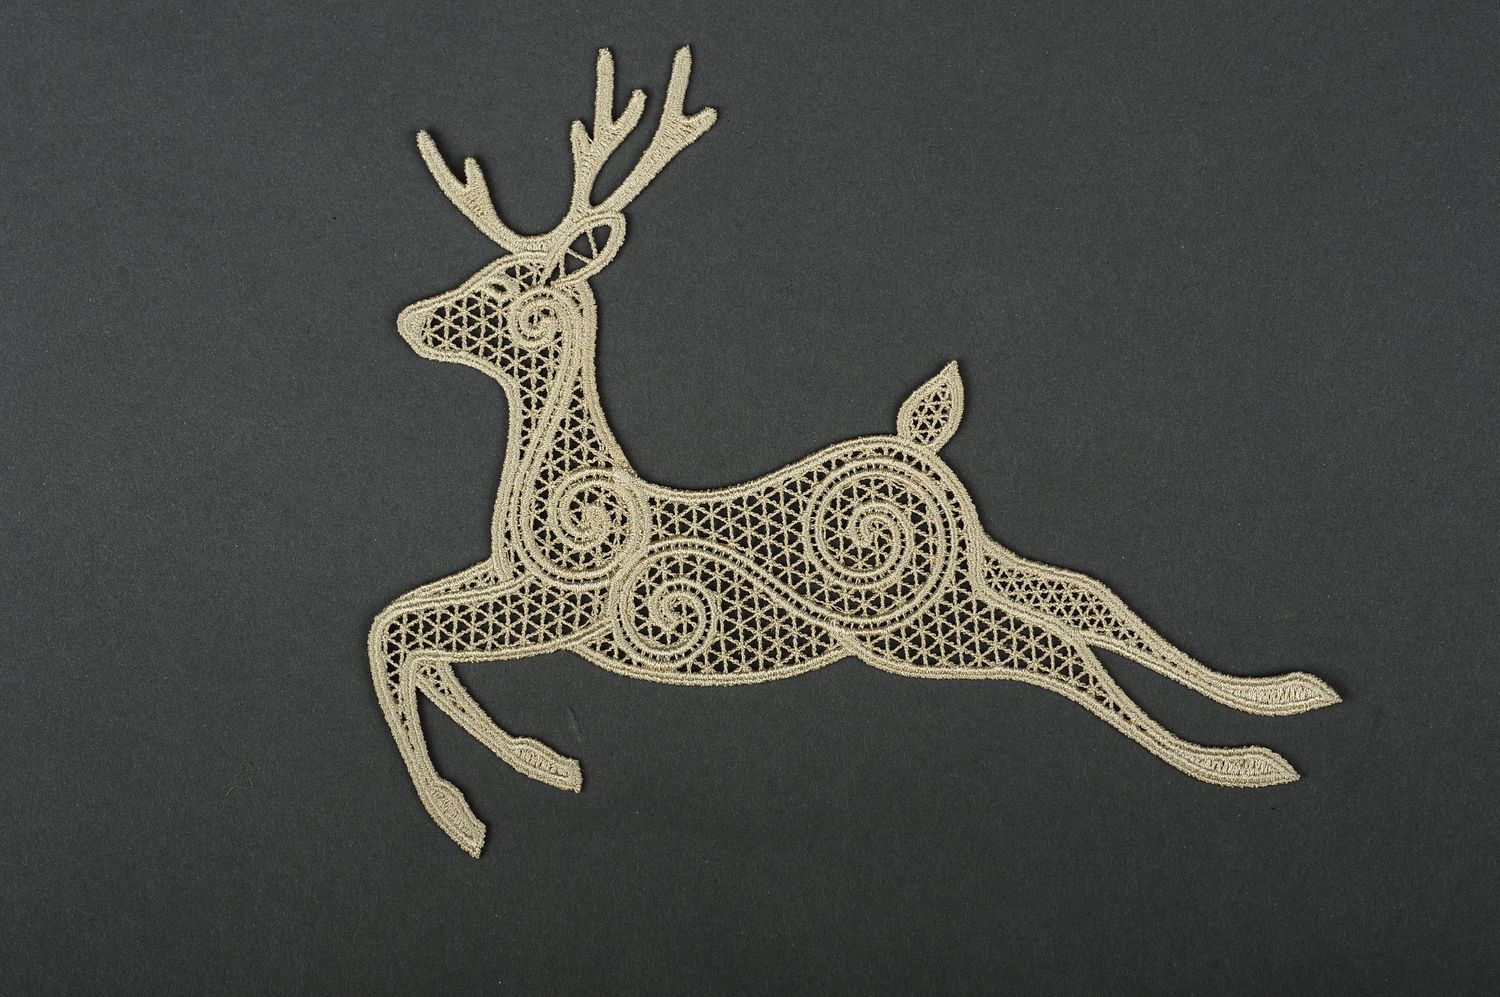 Deer Christmas toy lace toy openwork Christmas toy decorative use only photo 4